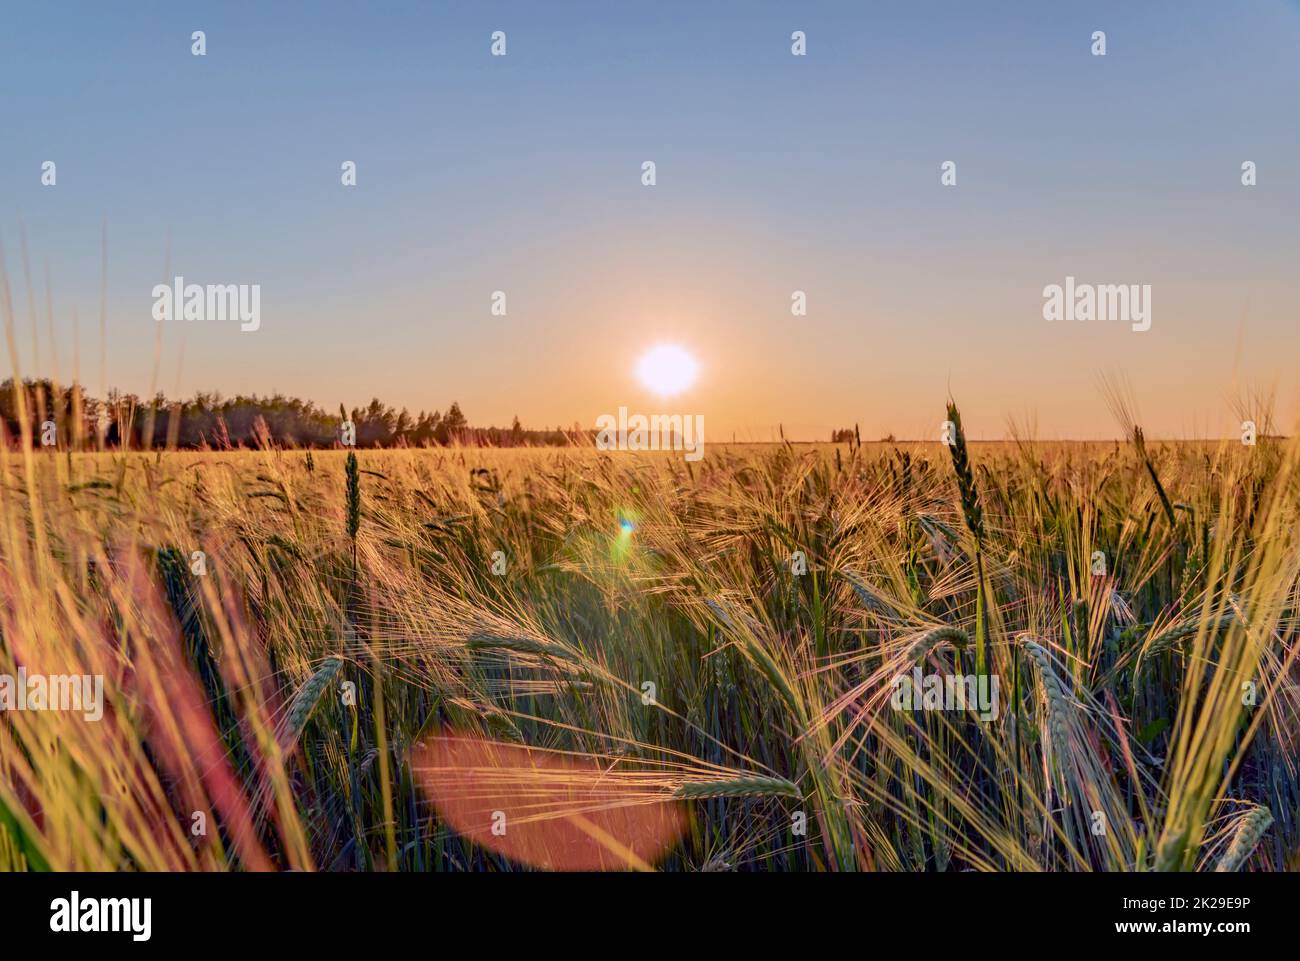 A walk through a field or meadow in the evening sun at sunset. Calmness, contemplation and peace when walking in the quiet early morning at dawn with the sun's rays.The ears of grain crops are waving Stock Photo